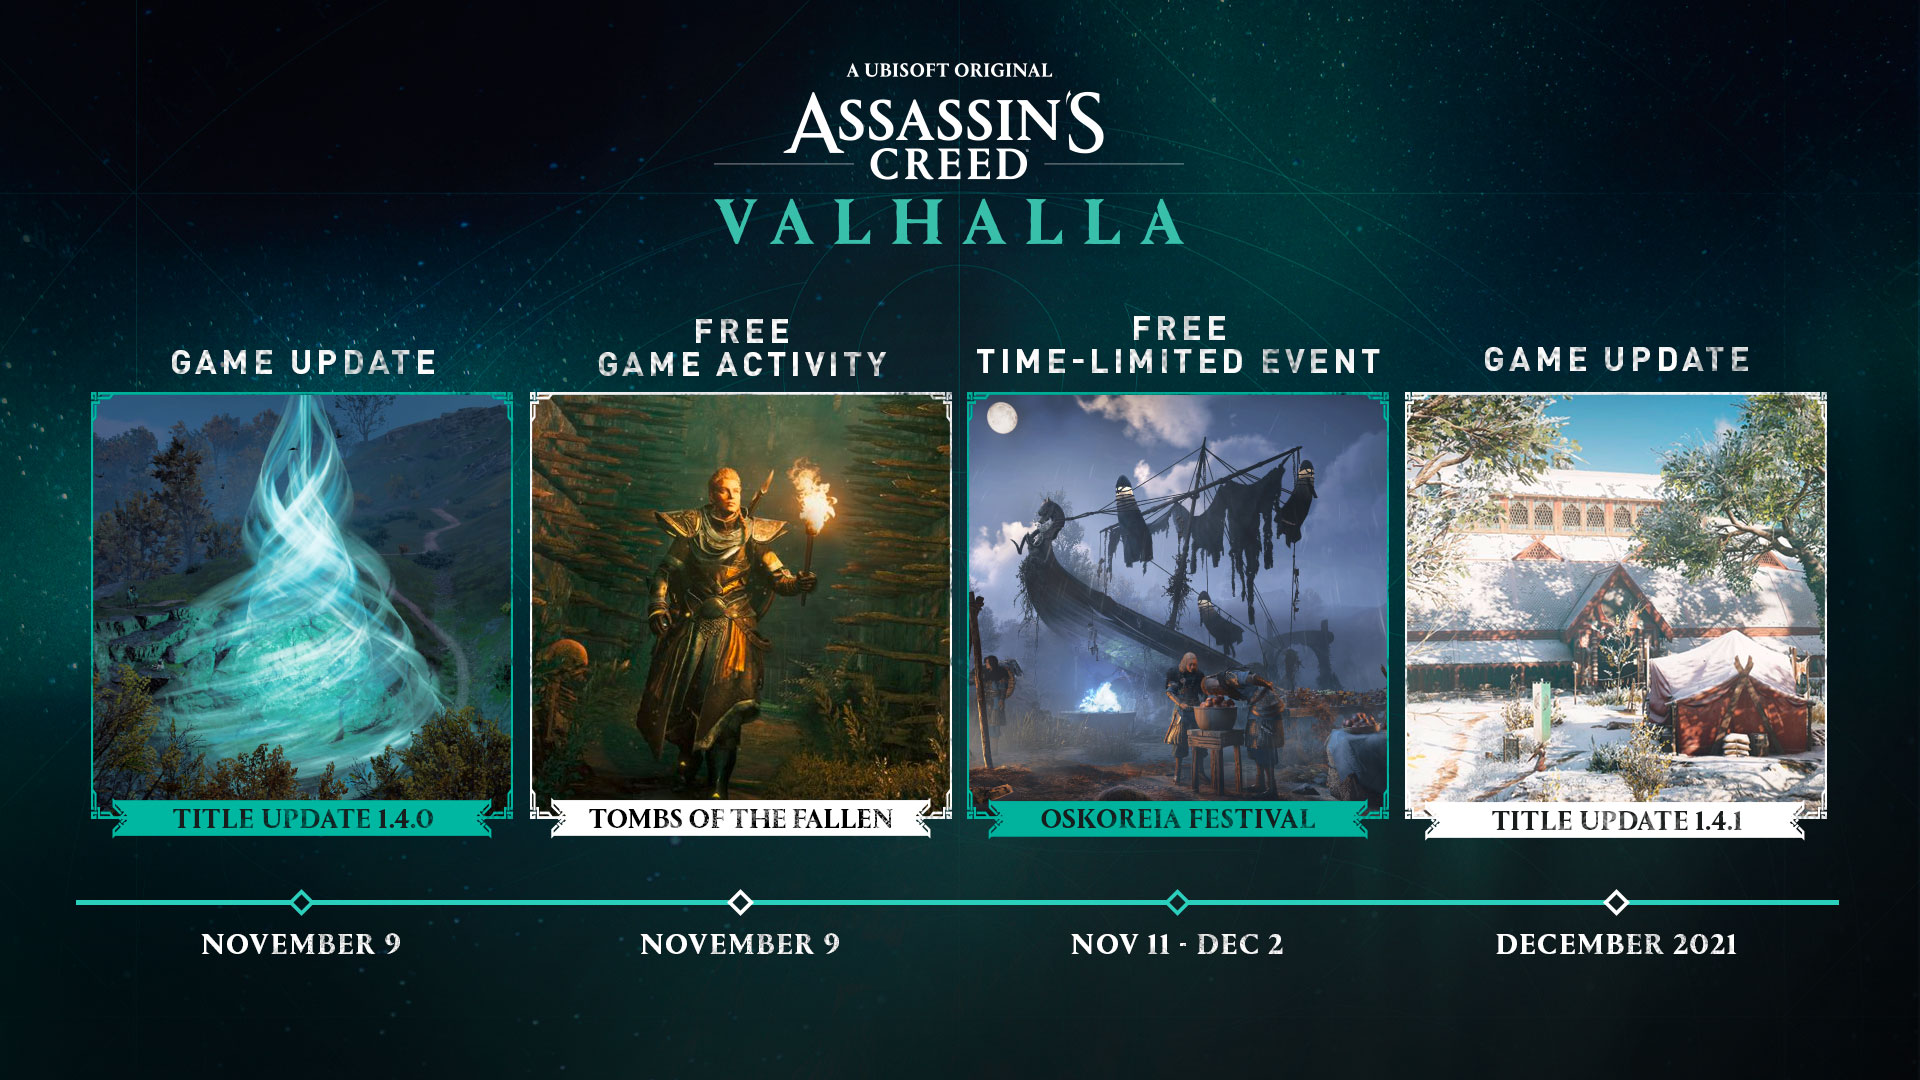 An infographic for Assassin’s Creed Valhalla with four categories, images, titles, and timings. From left; Game Update, a magical teal vortex in a forest, Title Update 1.4.0, November 9; Free Game Activity, Eivor with a torch, Tombs of the Fallen, November 9; Free Time-Limited Event, a ghastly ship, Oskoreia Festival, November 11 – December 2; Game Update, snow-covered longhouse, Title Update 1.4.1, December 2021.